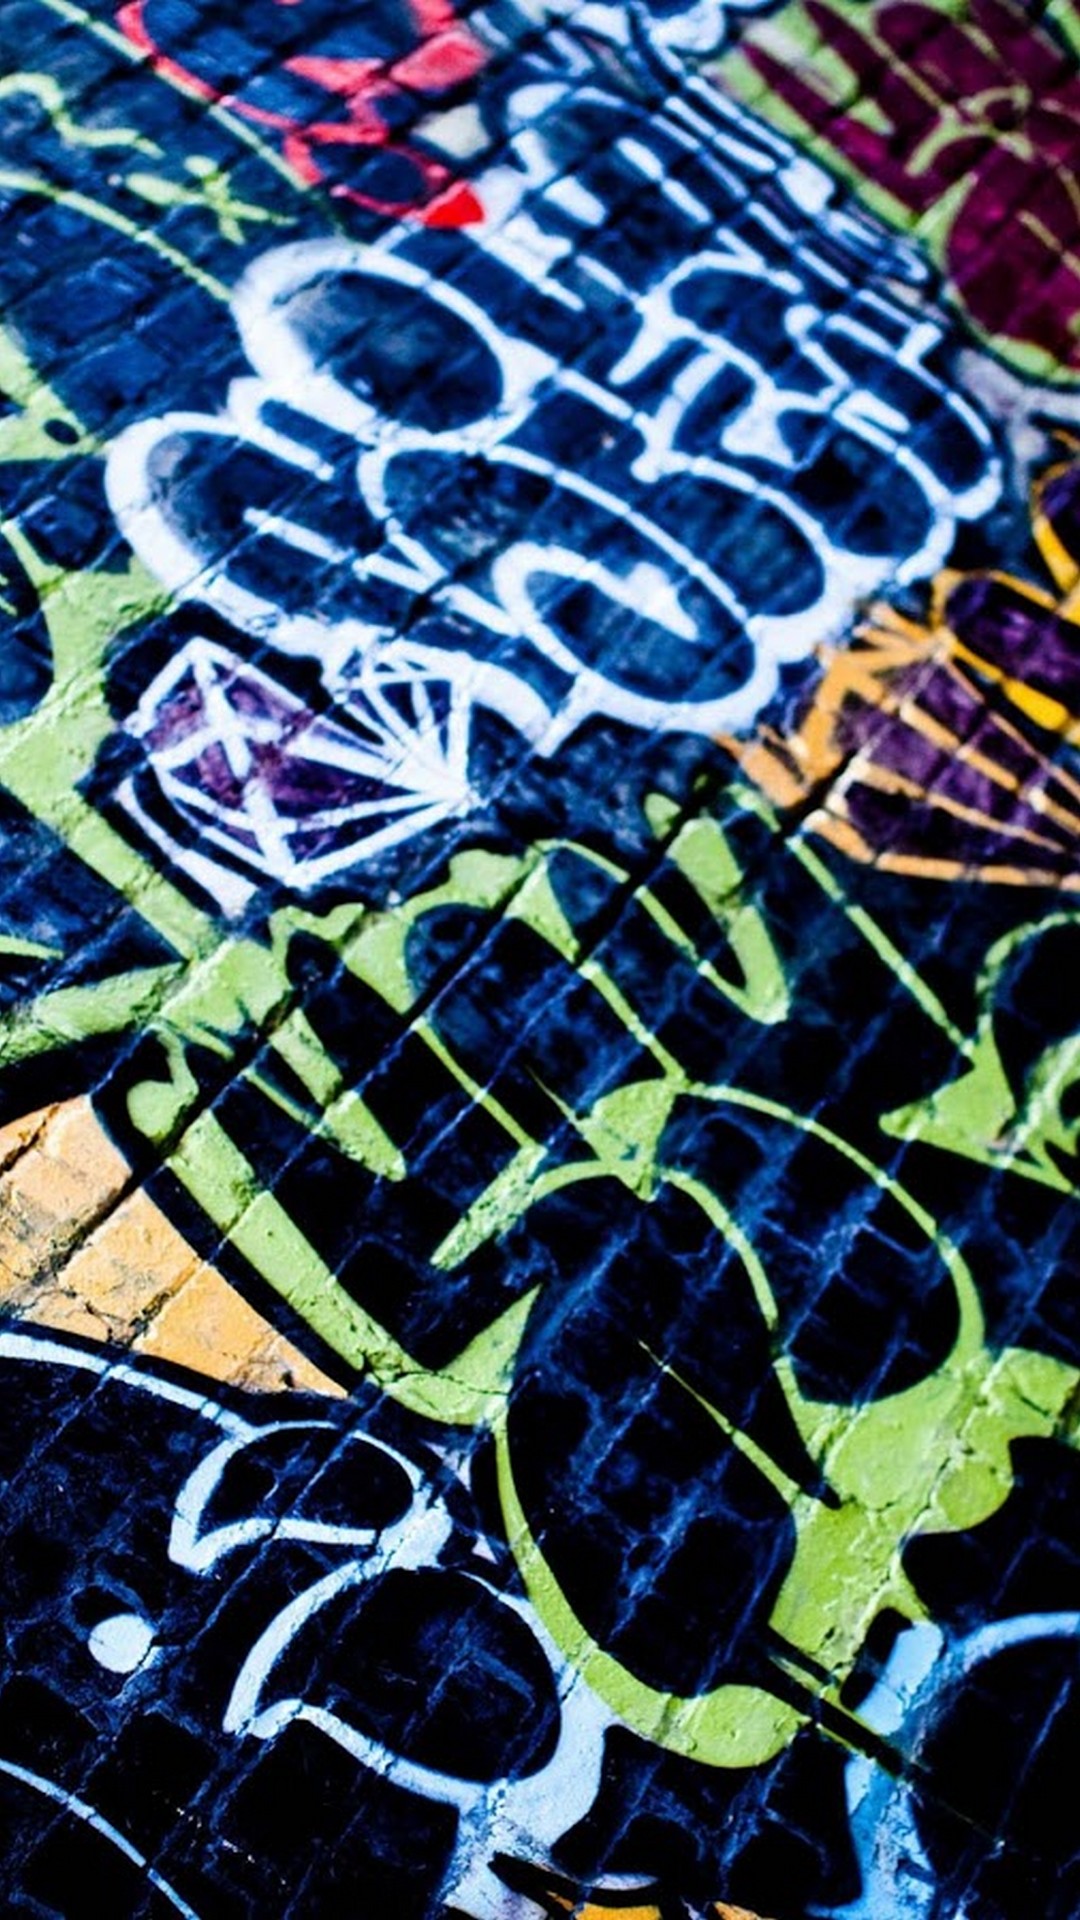 Graffiti Wallpaper Android 2021 Android Wallpapers Find and download graffiti phone wallpapers wallpapers, total 6 desktop background. graffiti wallpaper android 2021